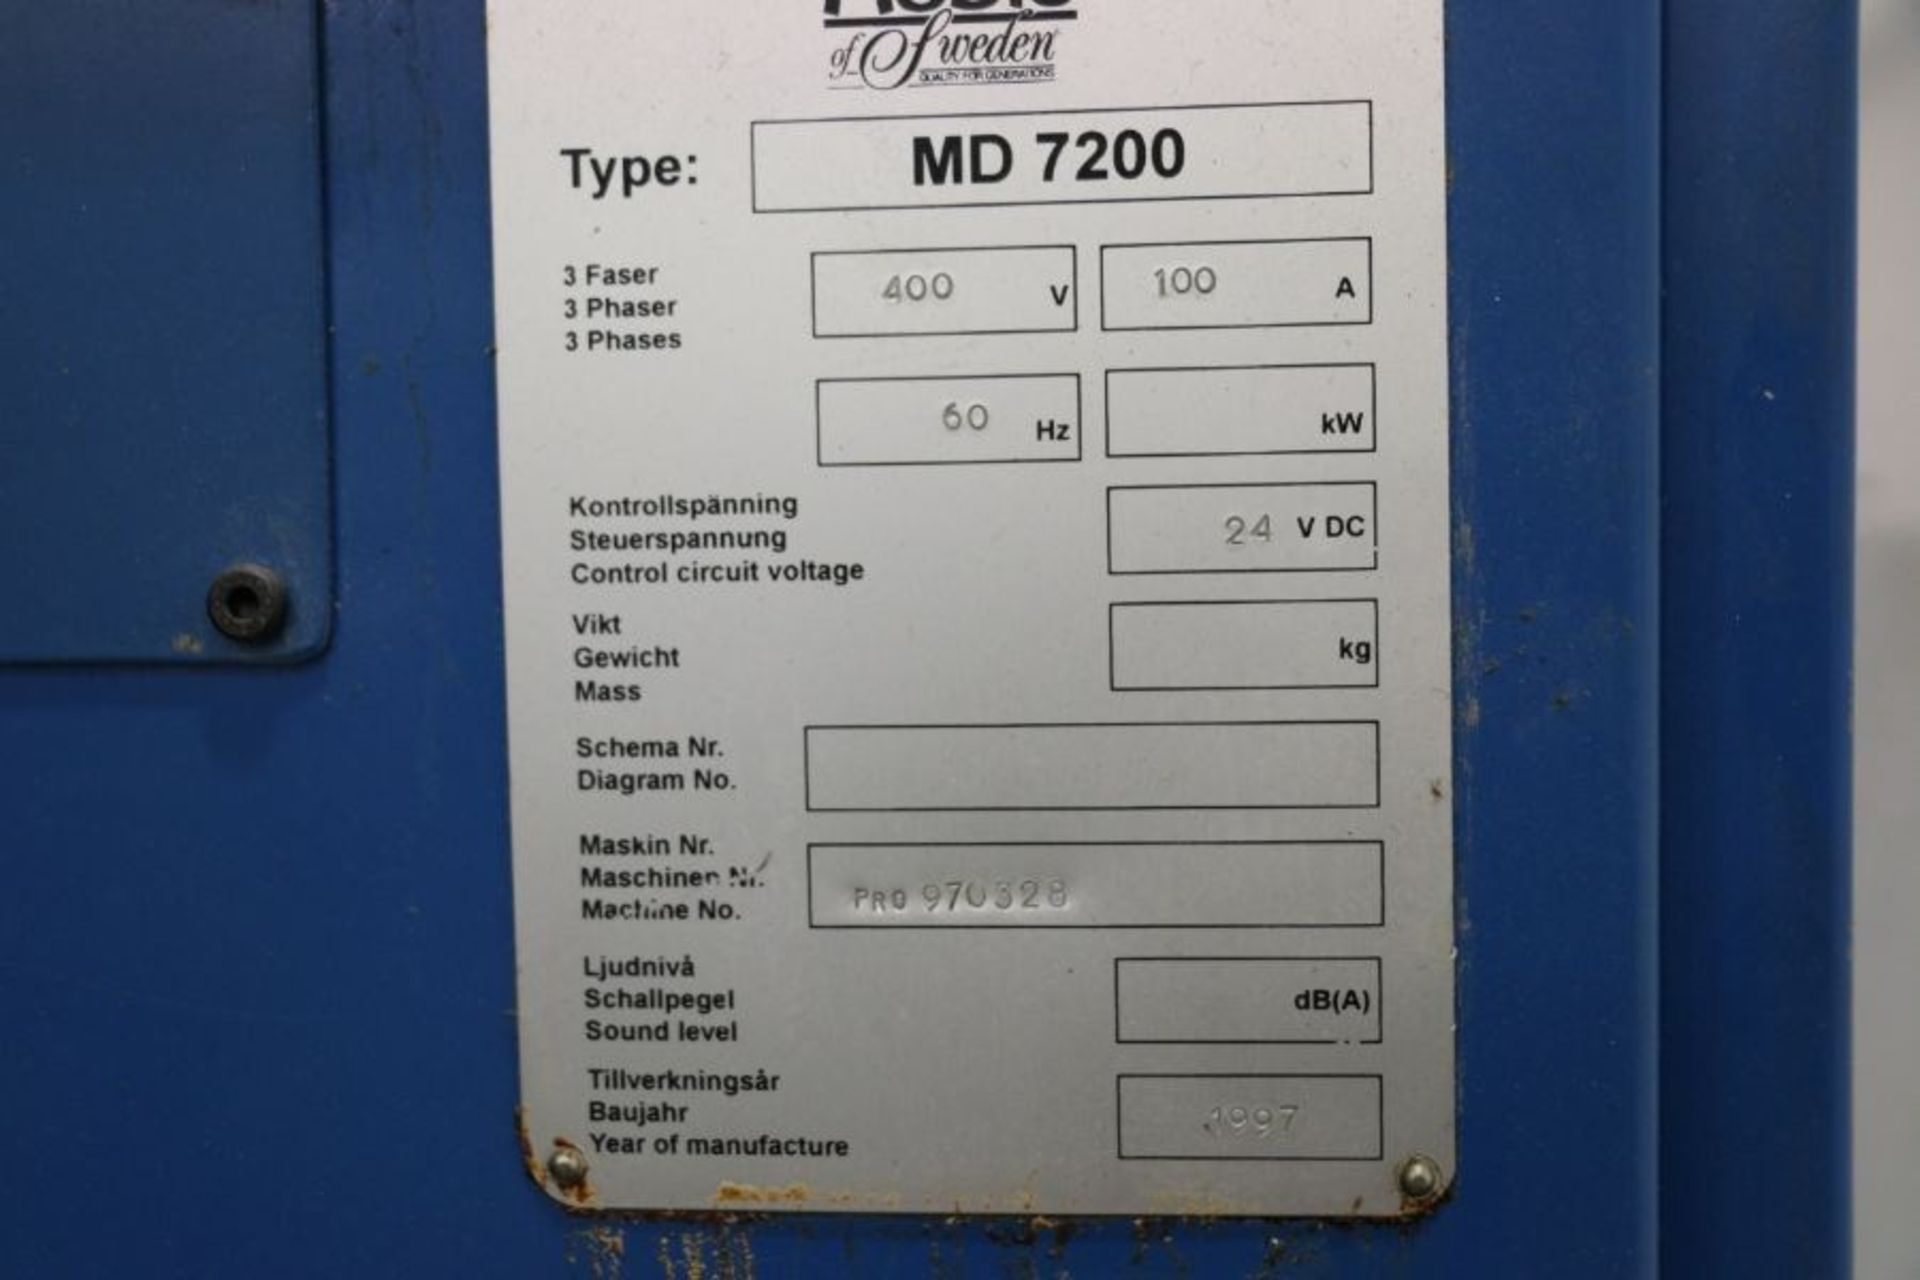 Modig MD7200, Fanuc 16M Control, 20K RPM, 24 ATC, CT40, s/n 970328, New 1997 *Parts Only Machine* - Image 8 of 8